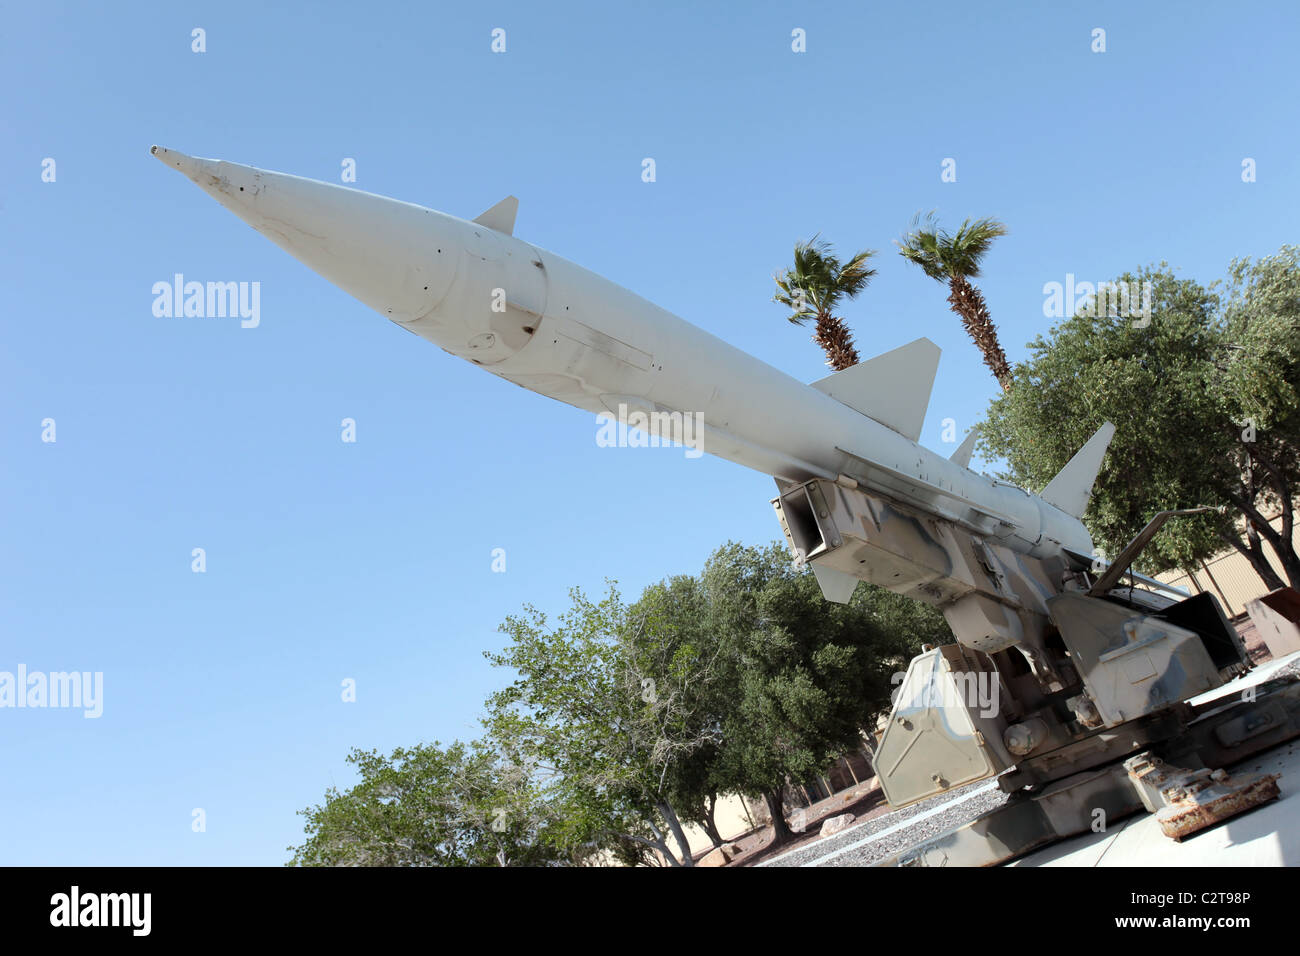 Soviet missile SA-2 Guideline surface to air missile captured by US Military for exploitation and training of aircrew. Stock Photo